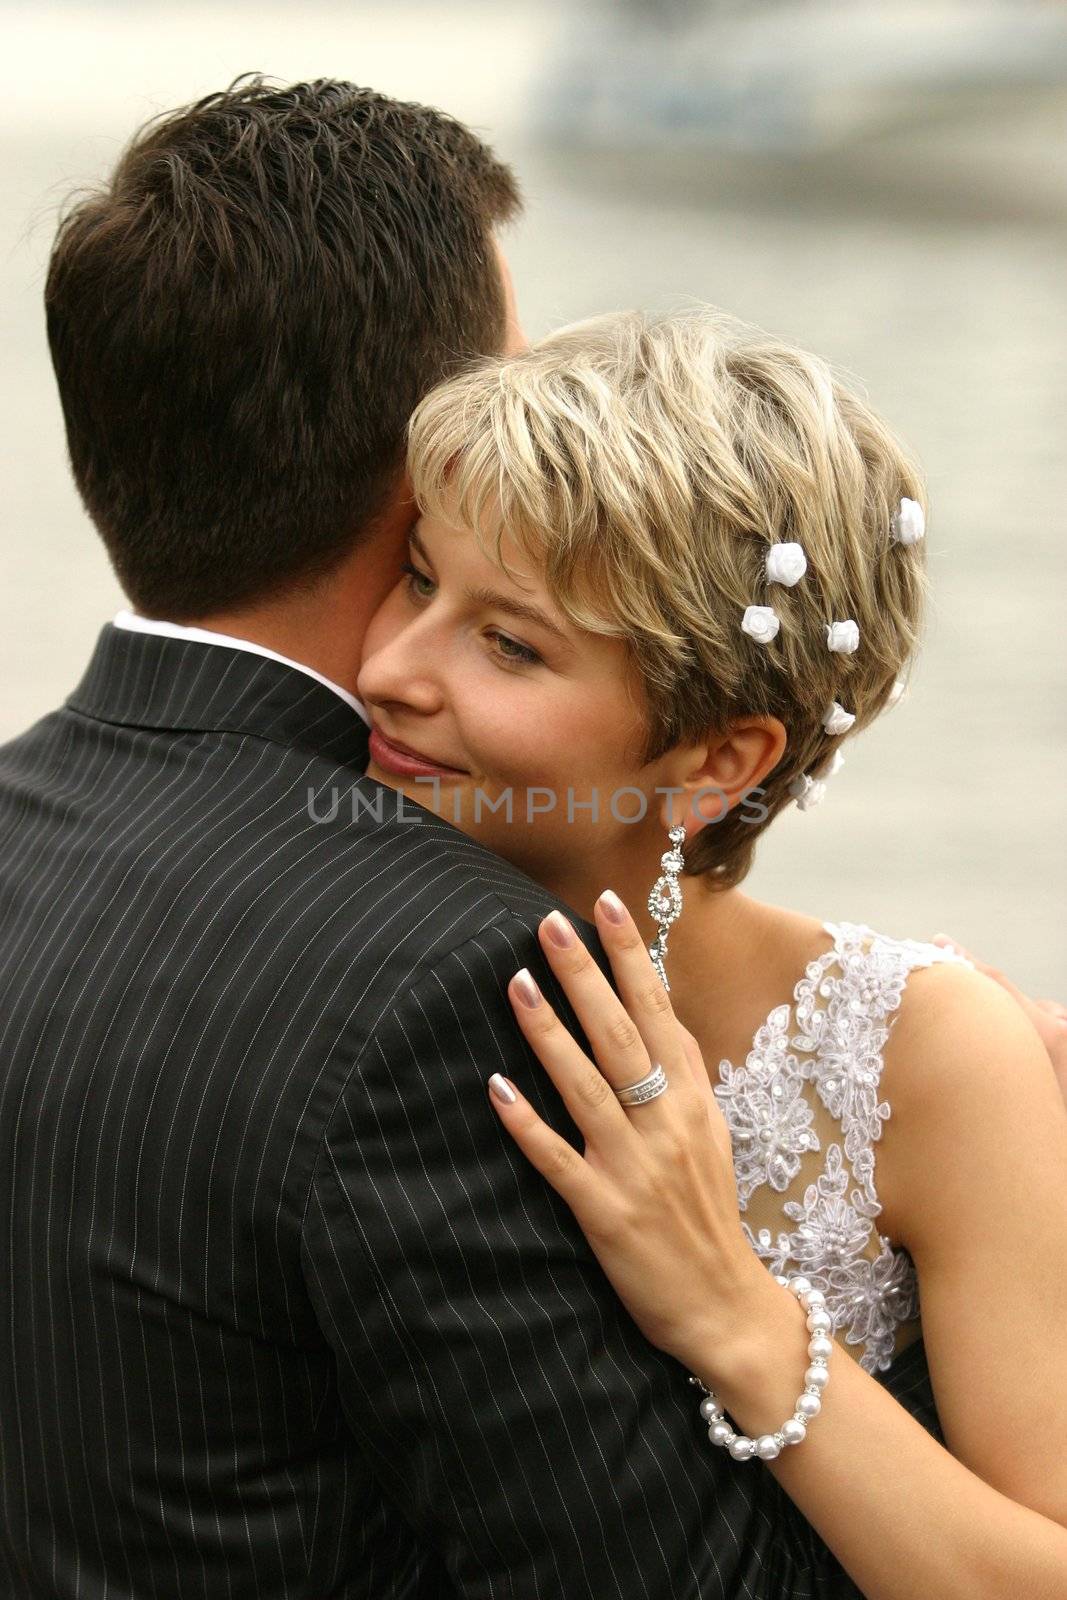 The bride with a smile, gently embraces the groom